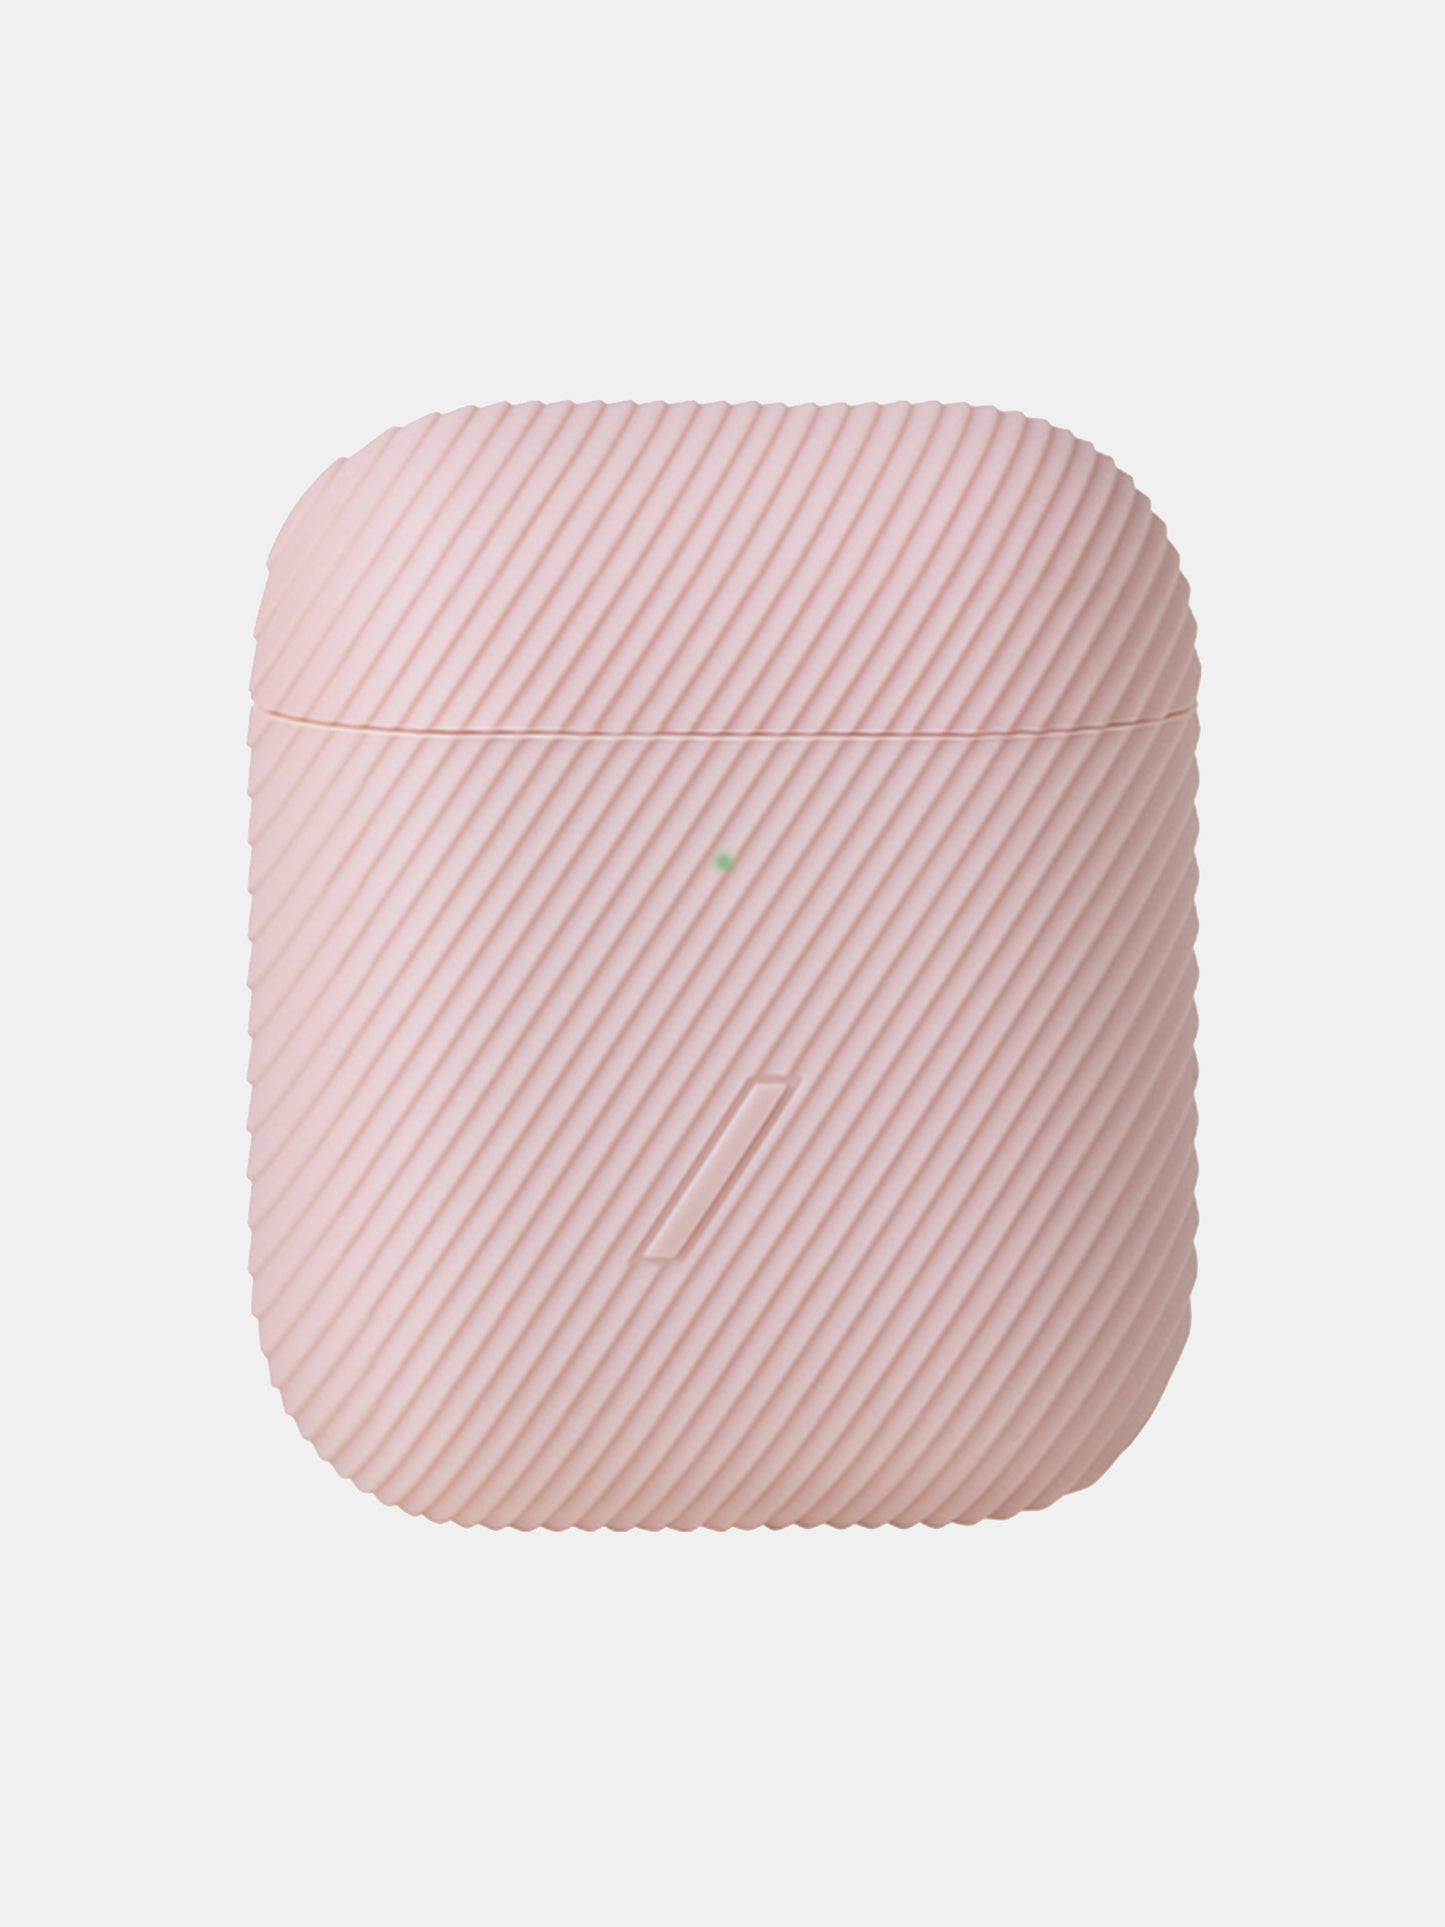 Native Union Rose Curve Case for AirPods